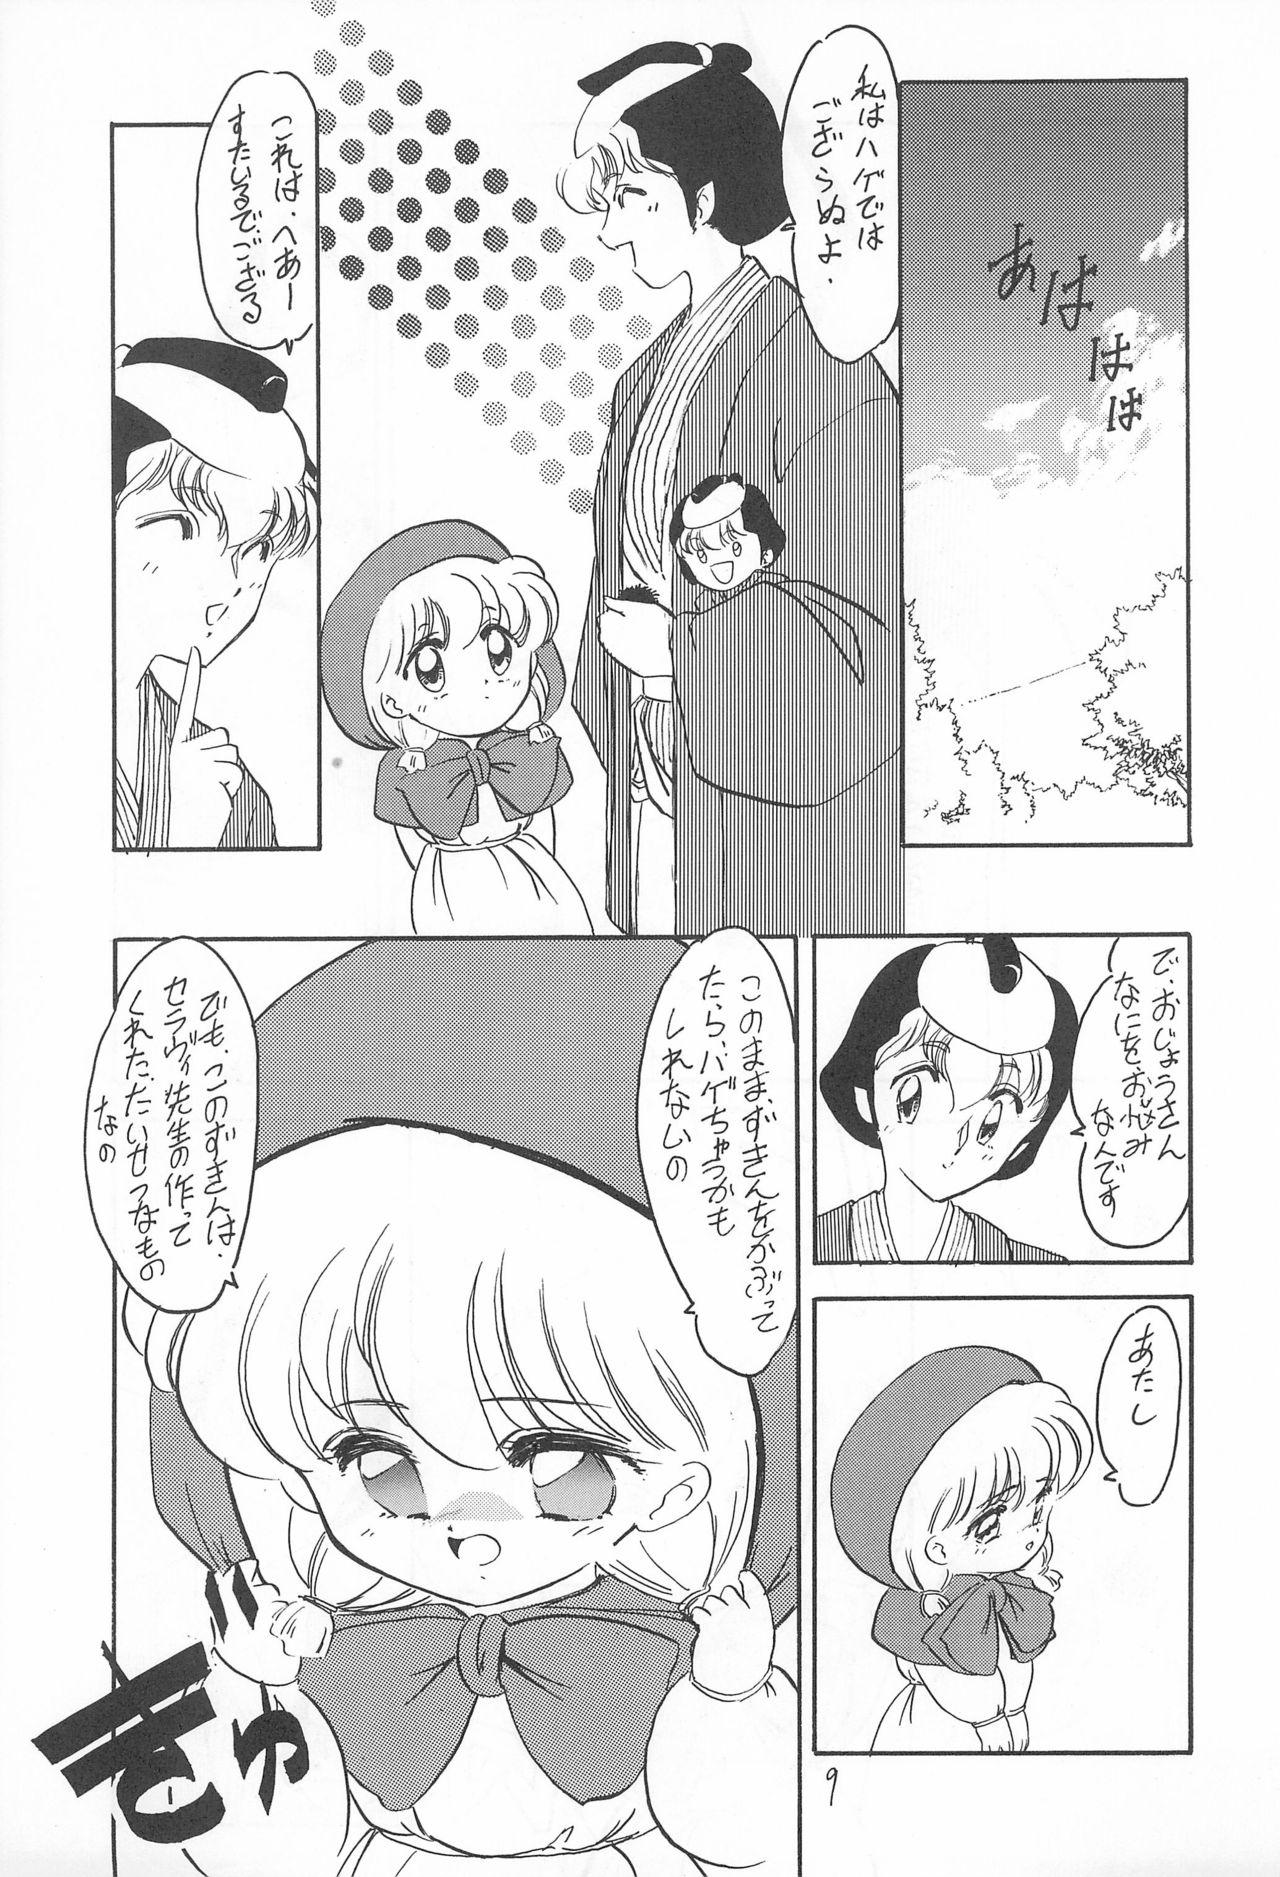 Outdoors Omote Chacha - Akazukin chacha | red riding hood chacha Spycam - Page 9